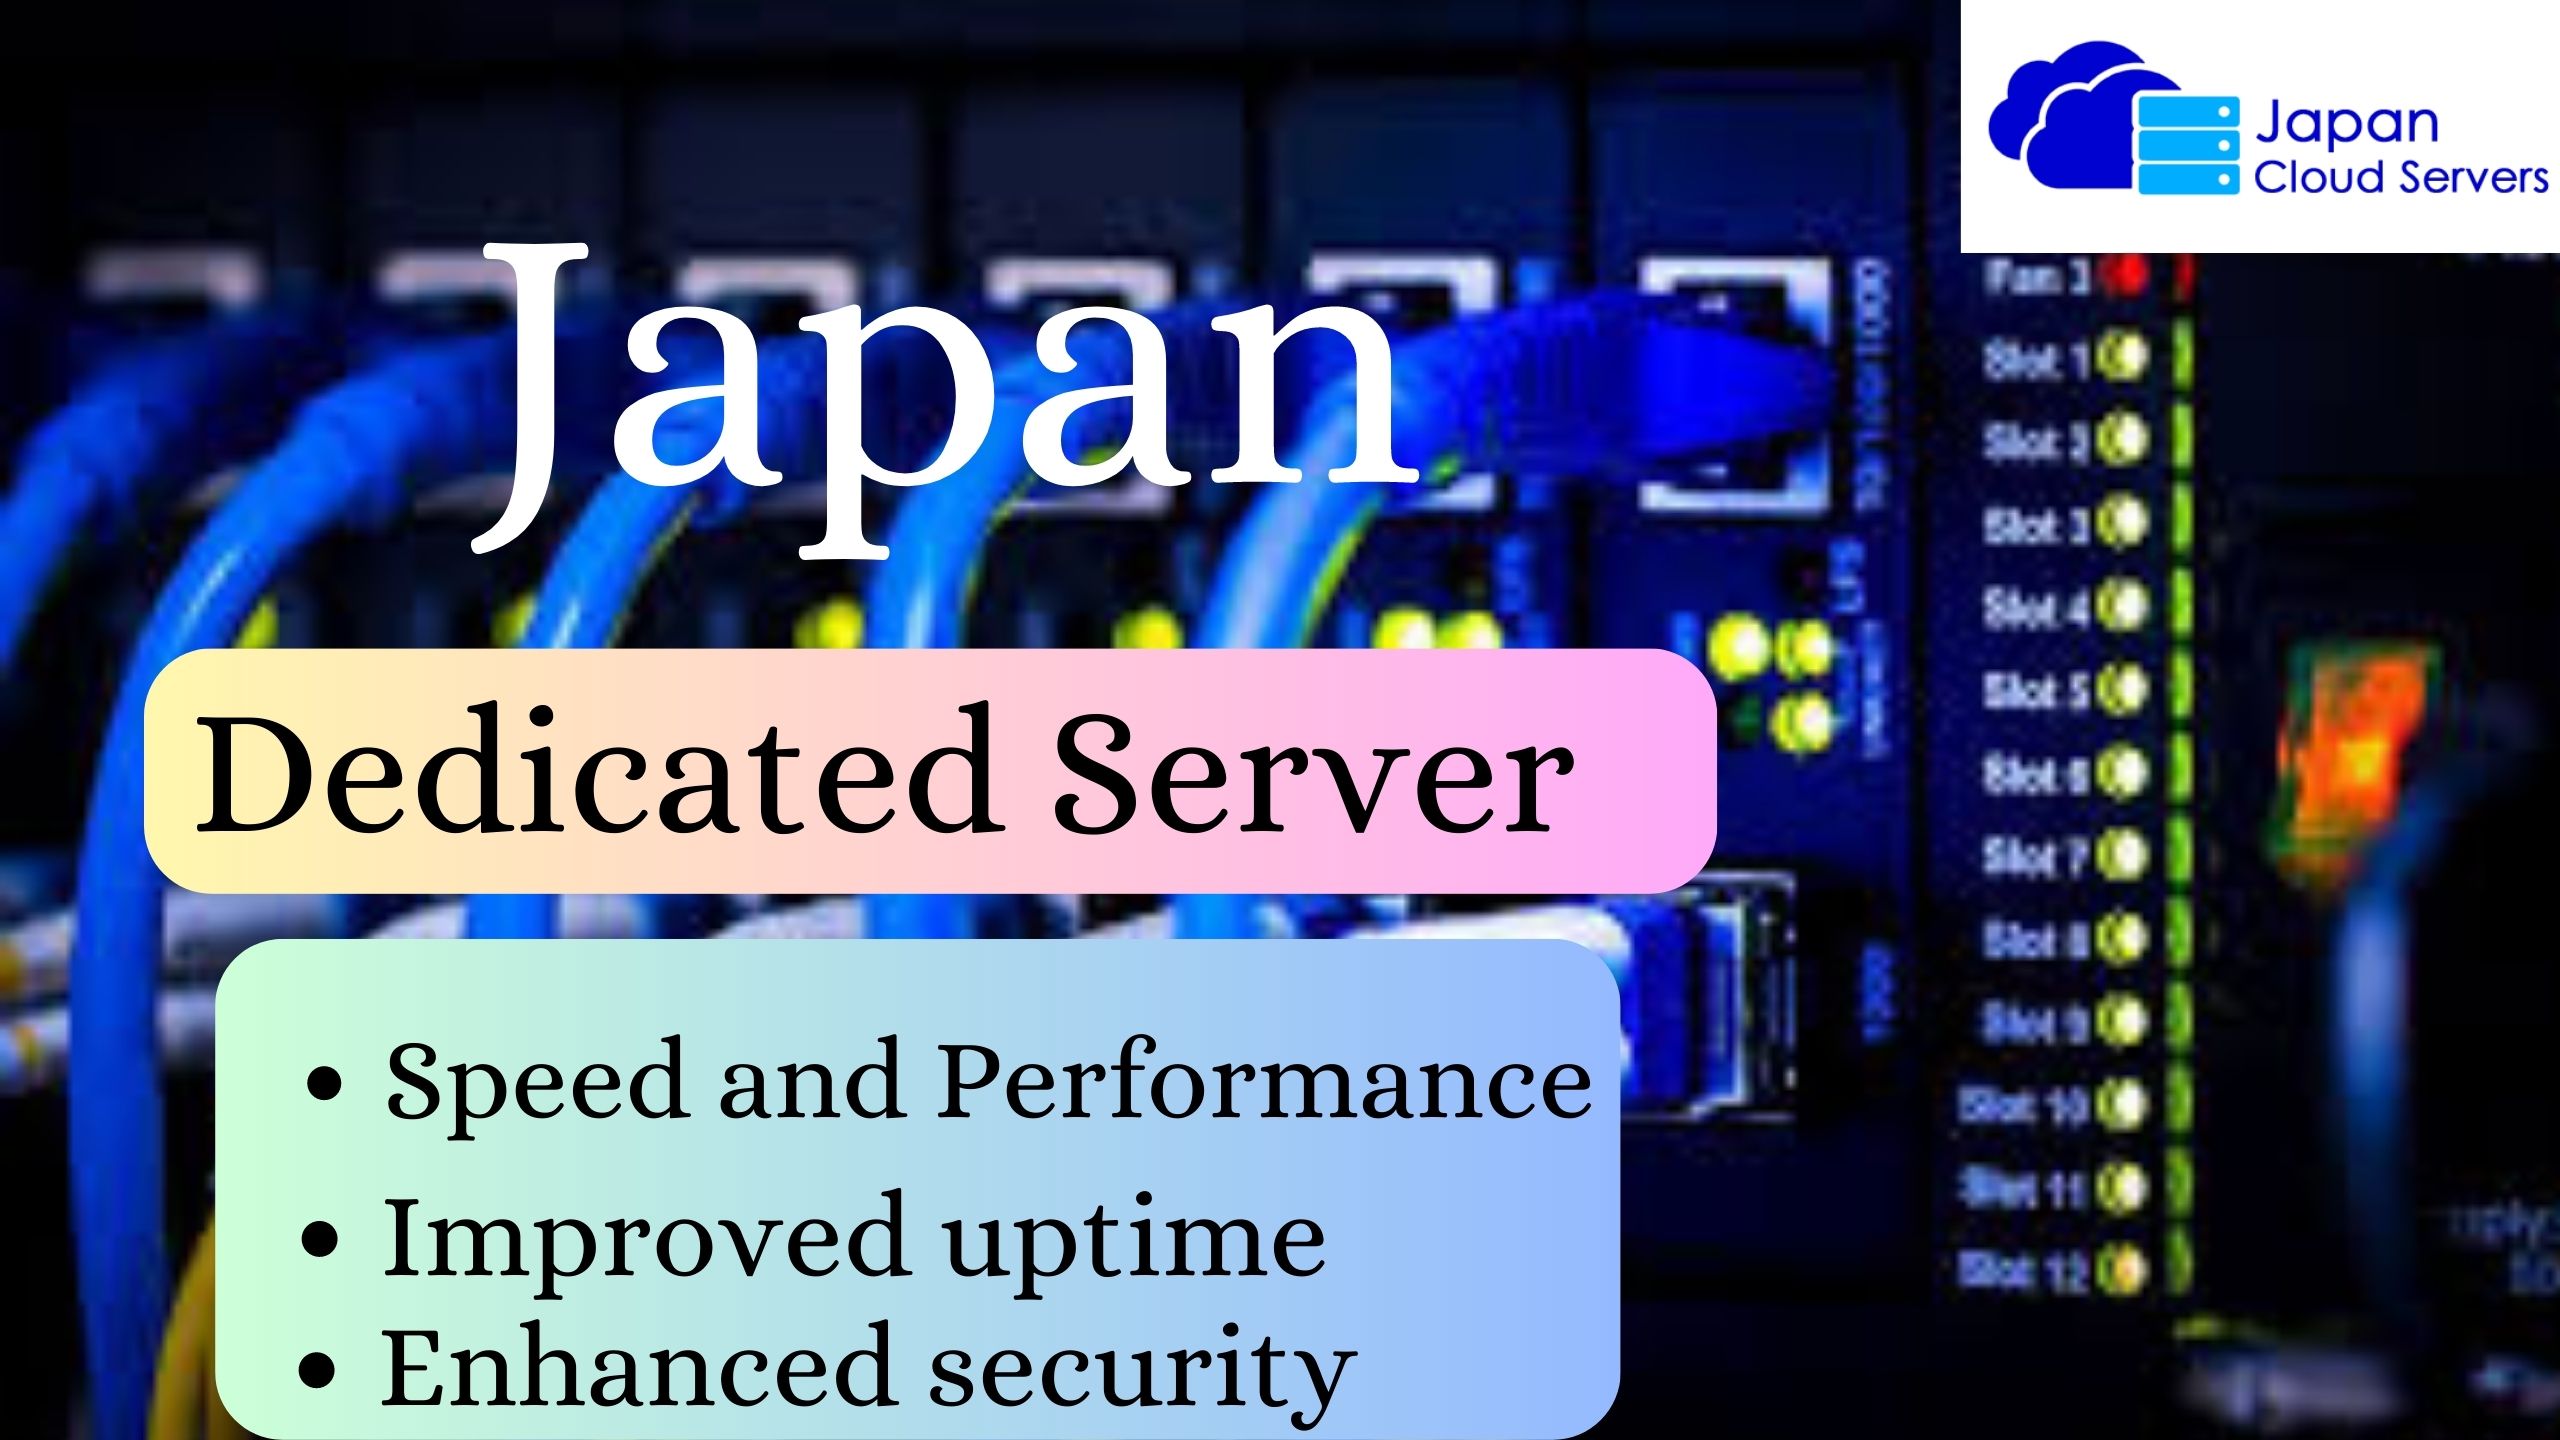 Get Blazing-Fast Connection Speeds with Japan Dedicated Server